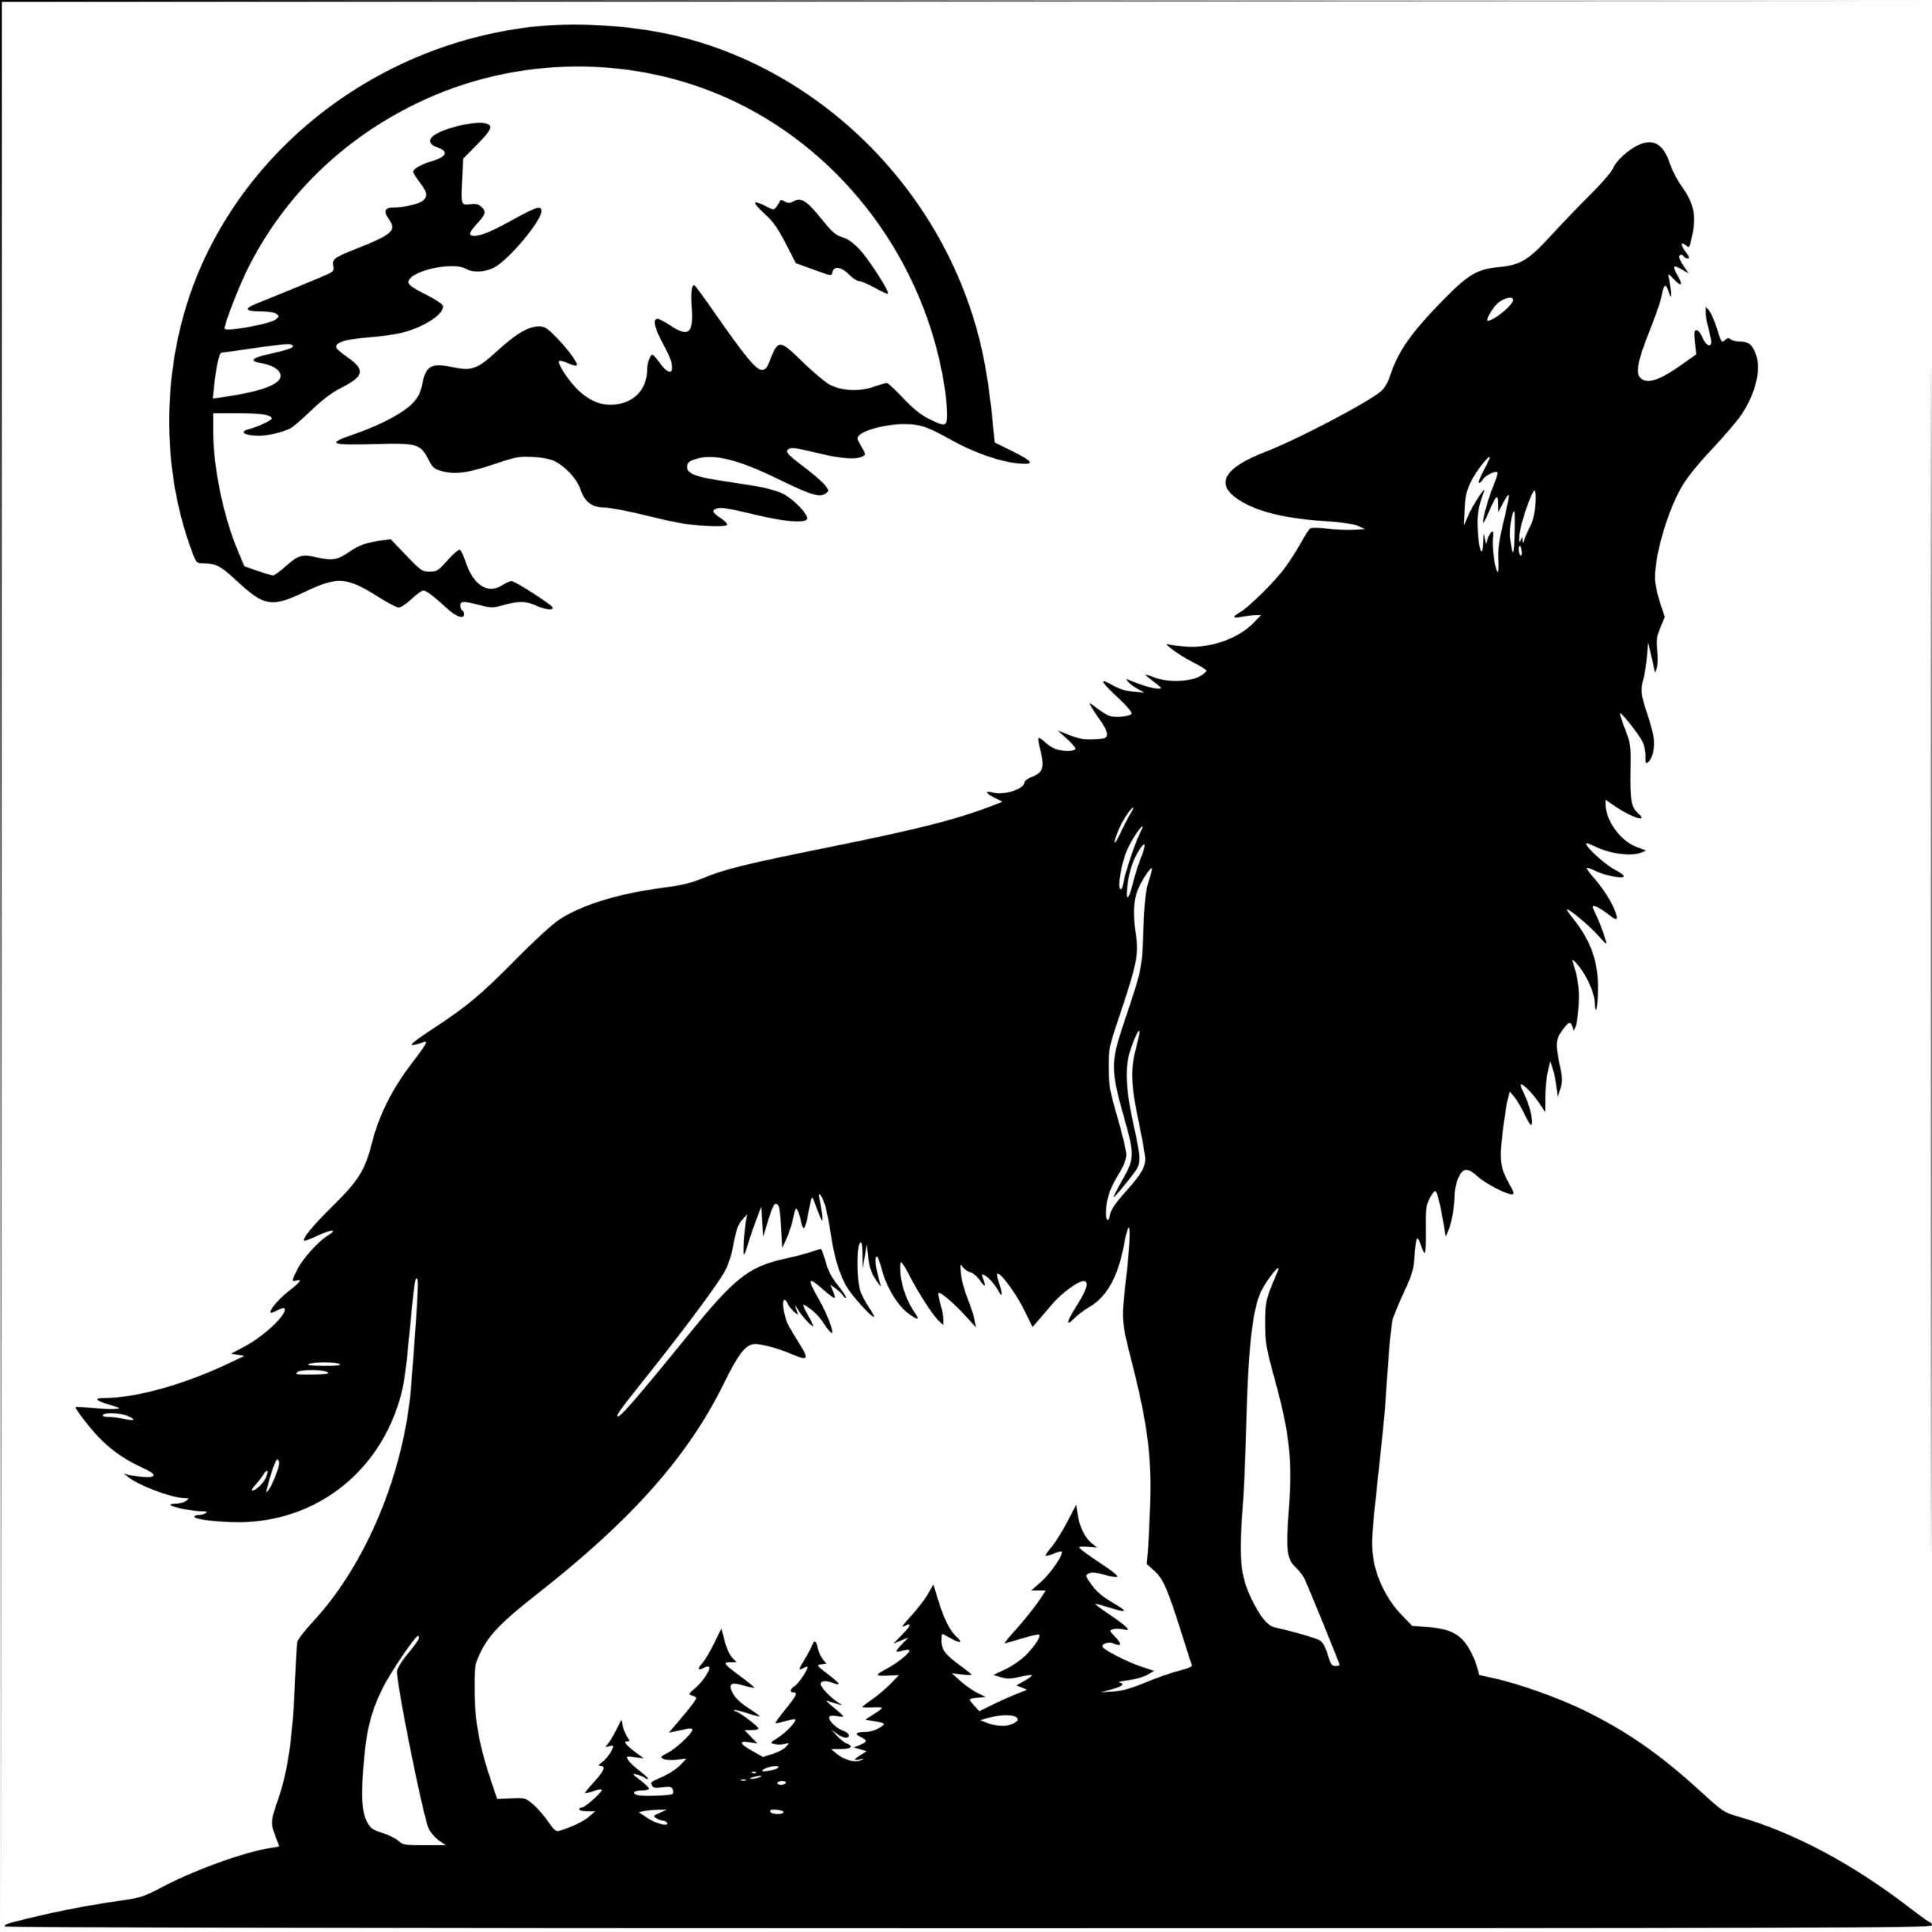 Mystic Moon Wolf Image SVG File for Cricut, Silhouette, Laser Machines